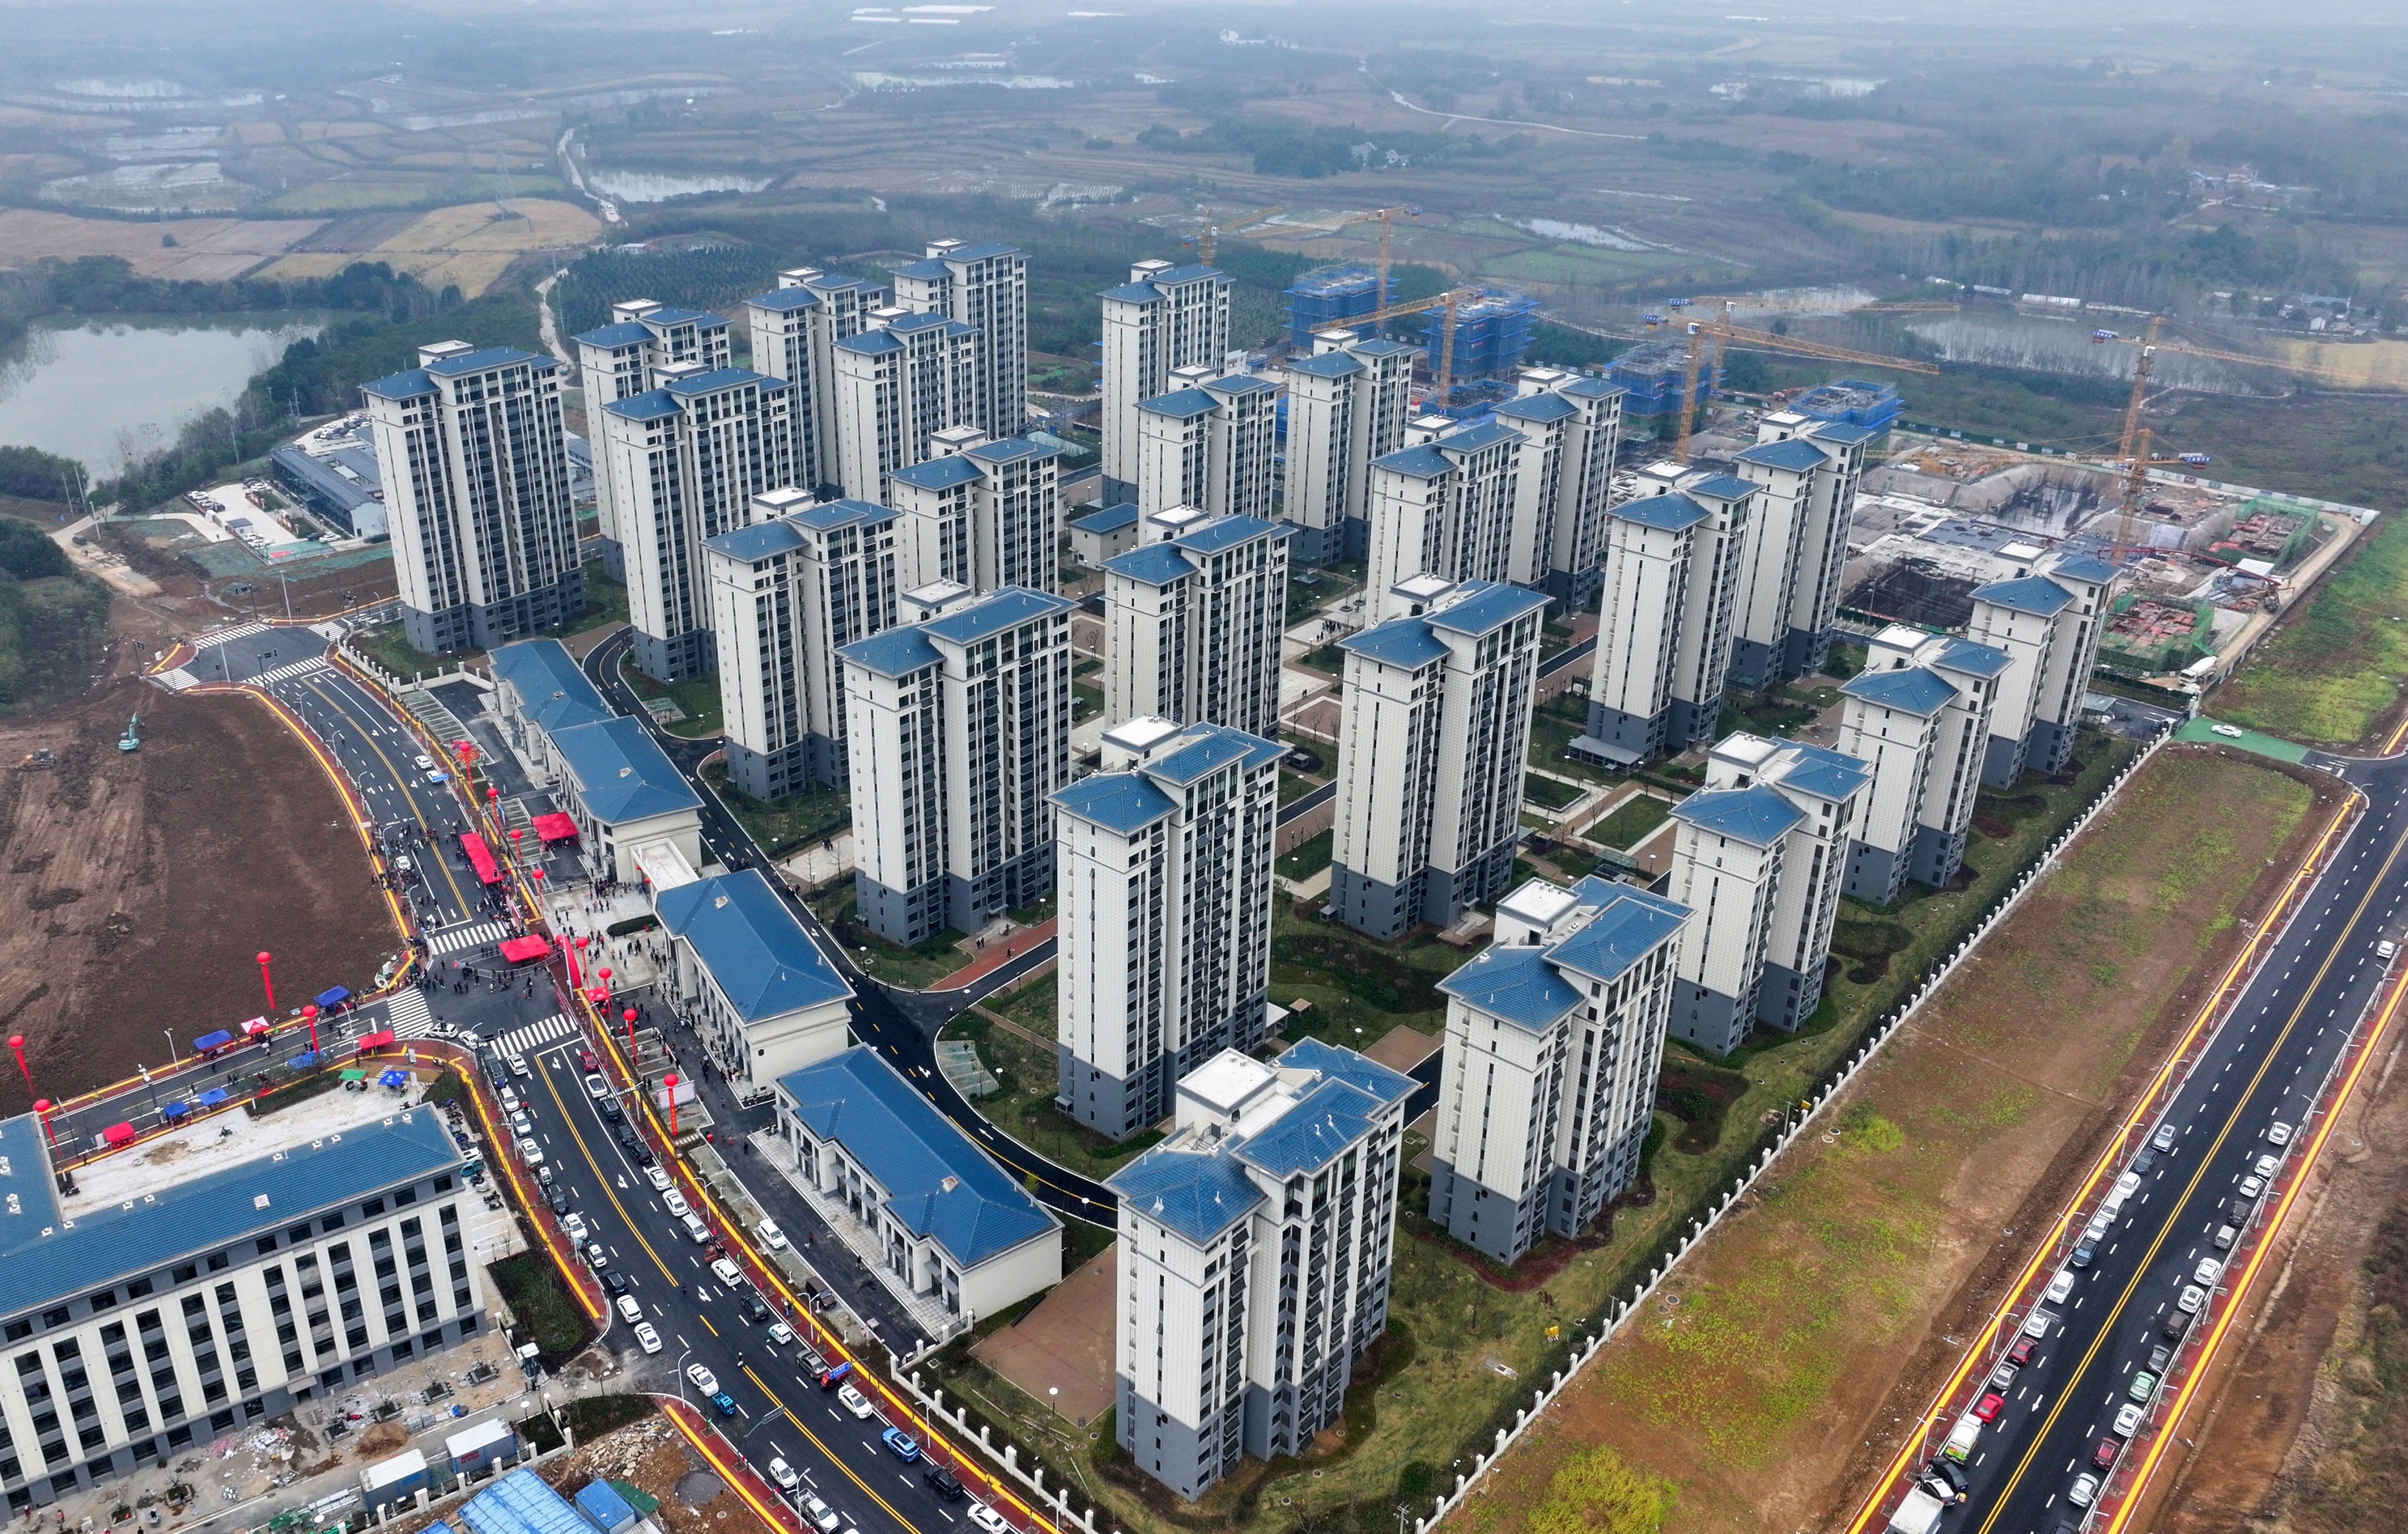 A newly built residential complex is seen in China’s Anhui province. Authorities are taking steps to clear excess housing inventory in the latest move to shore up the nation’s economy. Photo: Xinhua